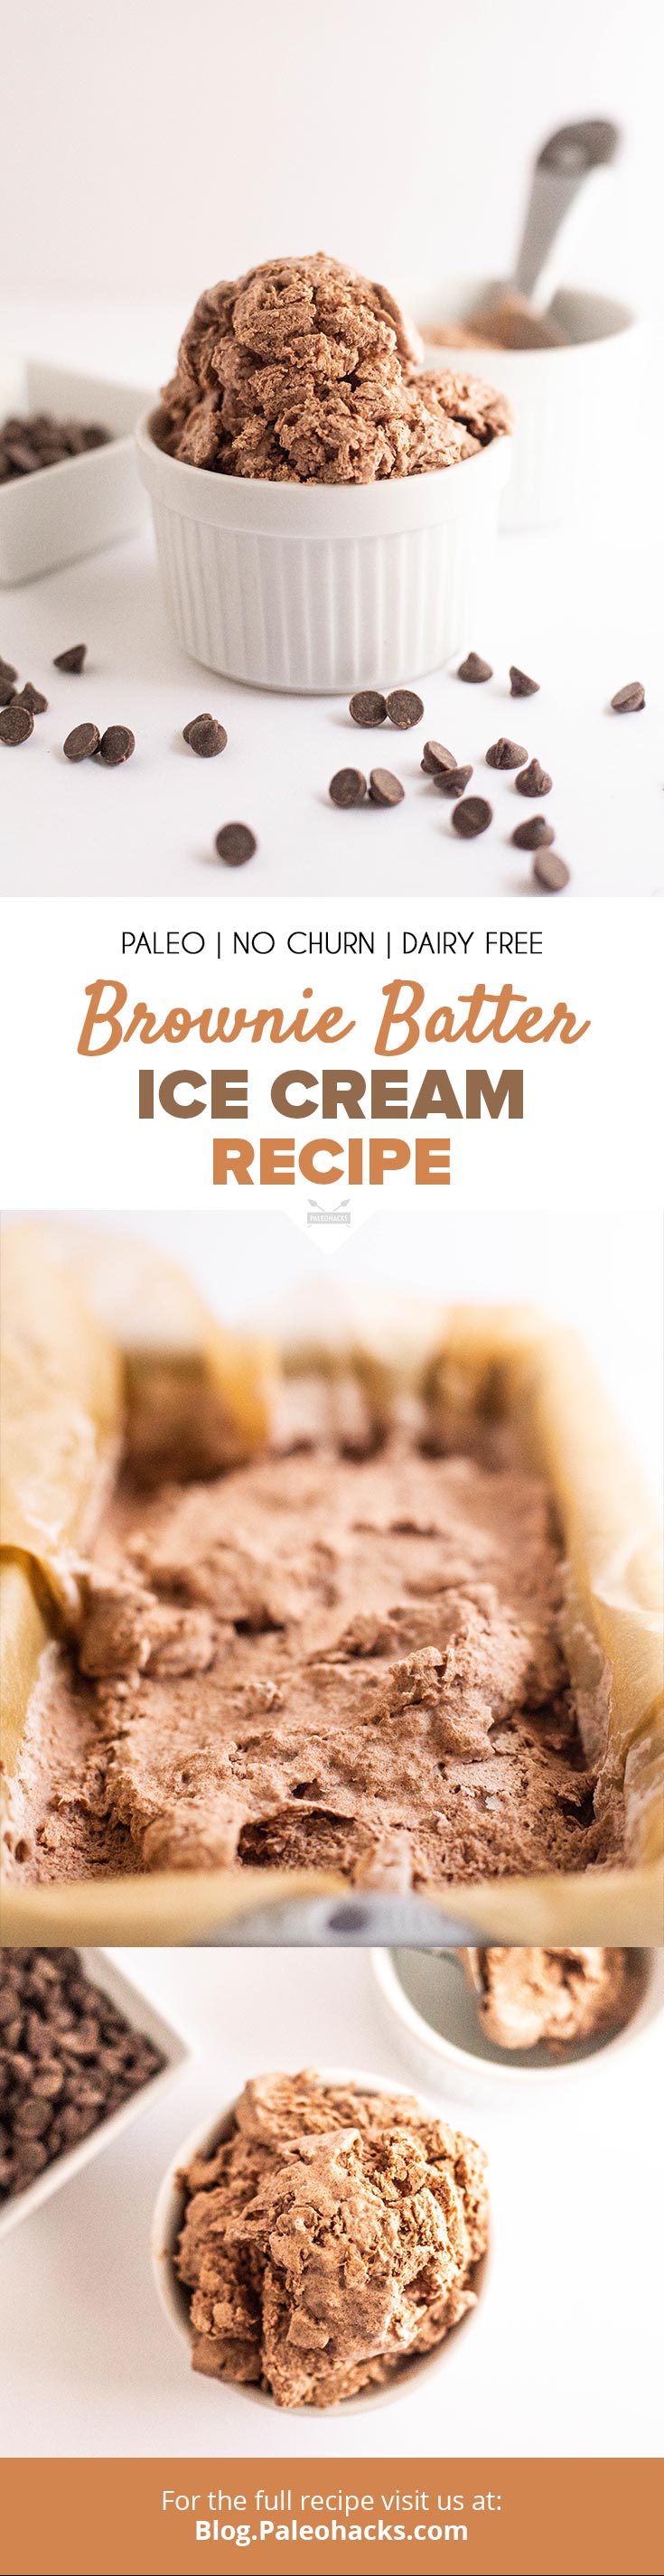 Dig into these dense and decadent brownie batter ice cream - no churning necessary. It's dairy-free, hassle-free, and oh so heavenly.